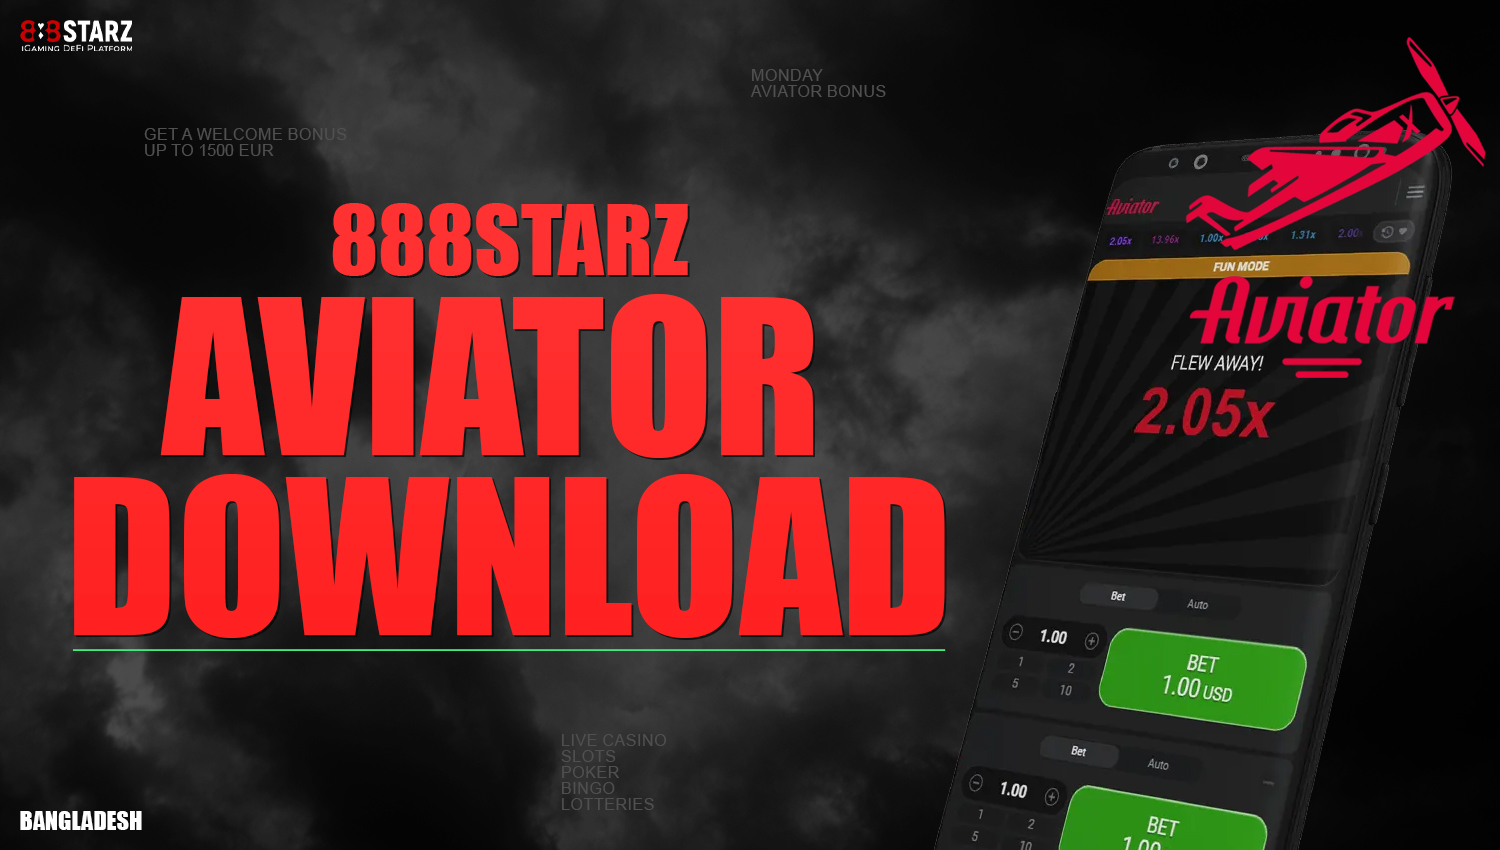 How to download 888starz mobile app for Aviator game